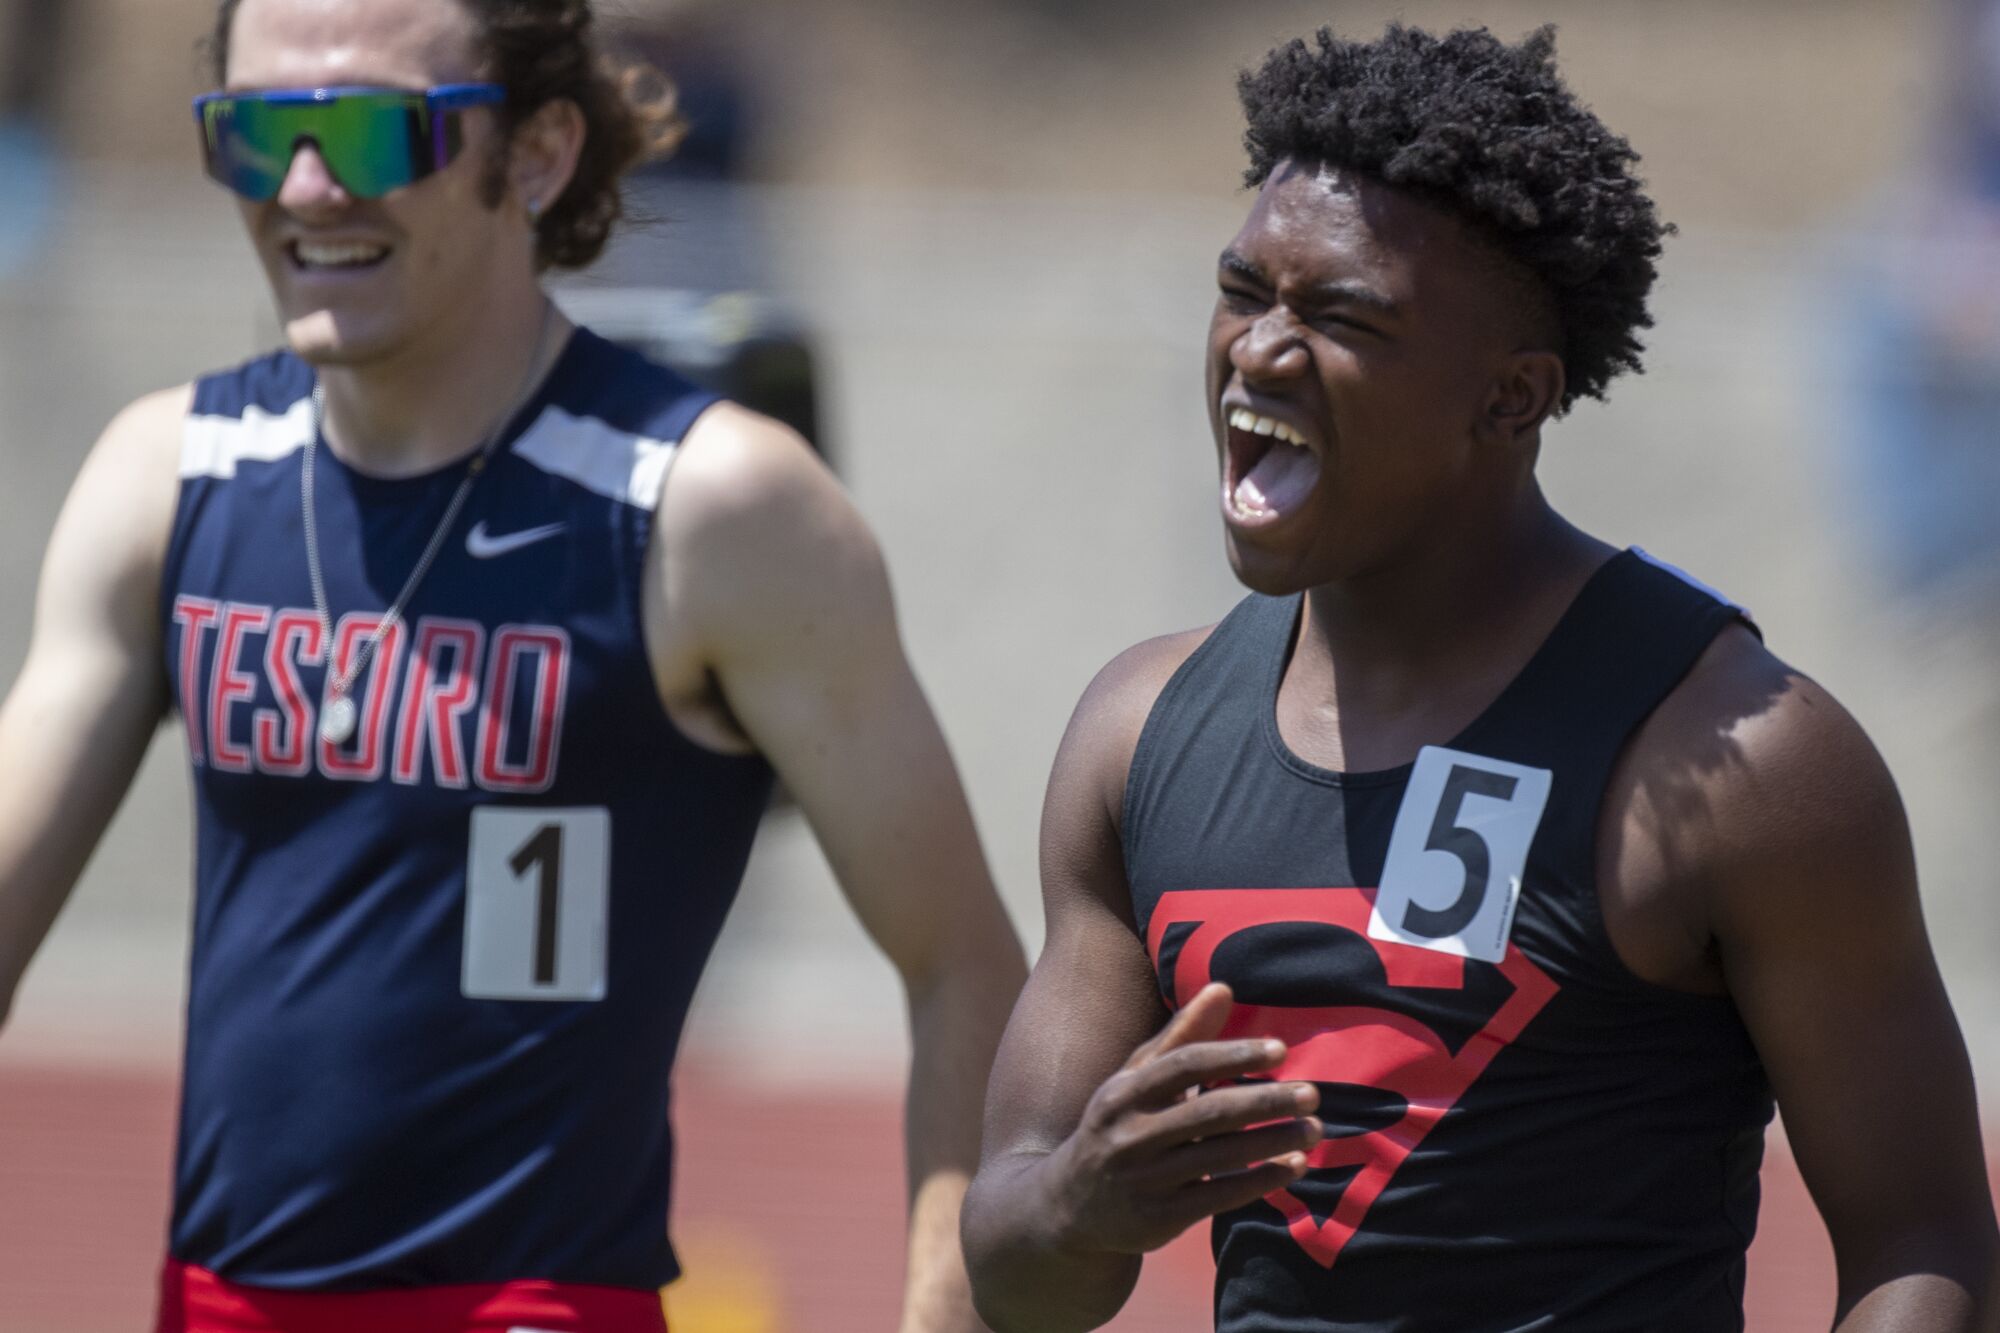 Gardena Serra High sprinter Rodrick Pleasant lets out a yell after winning the boys' 100 meters.